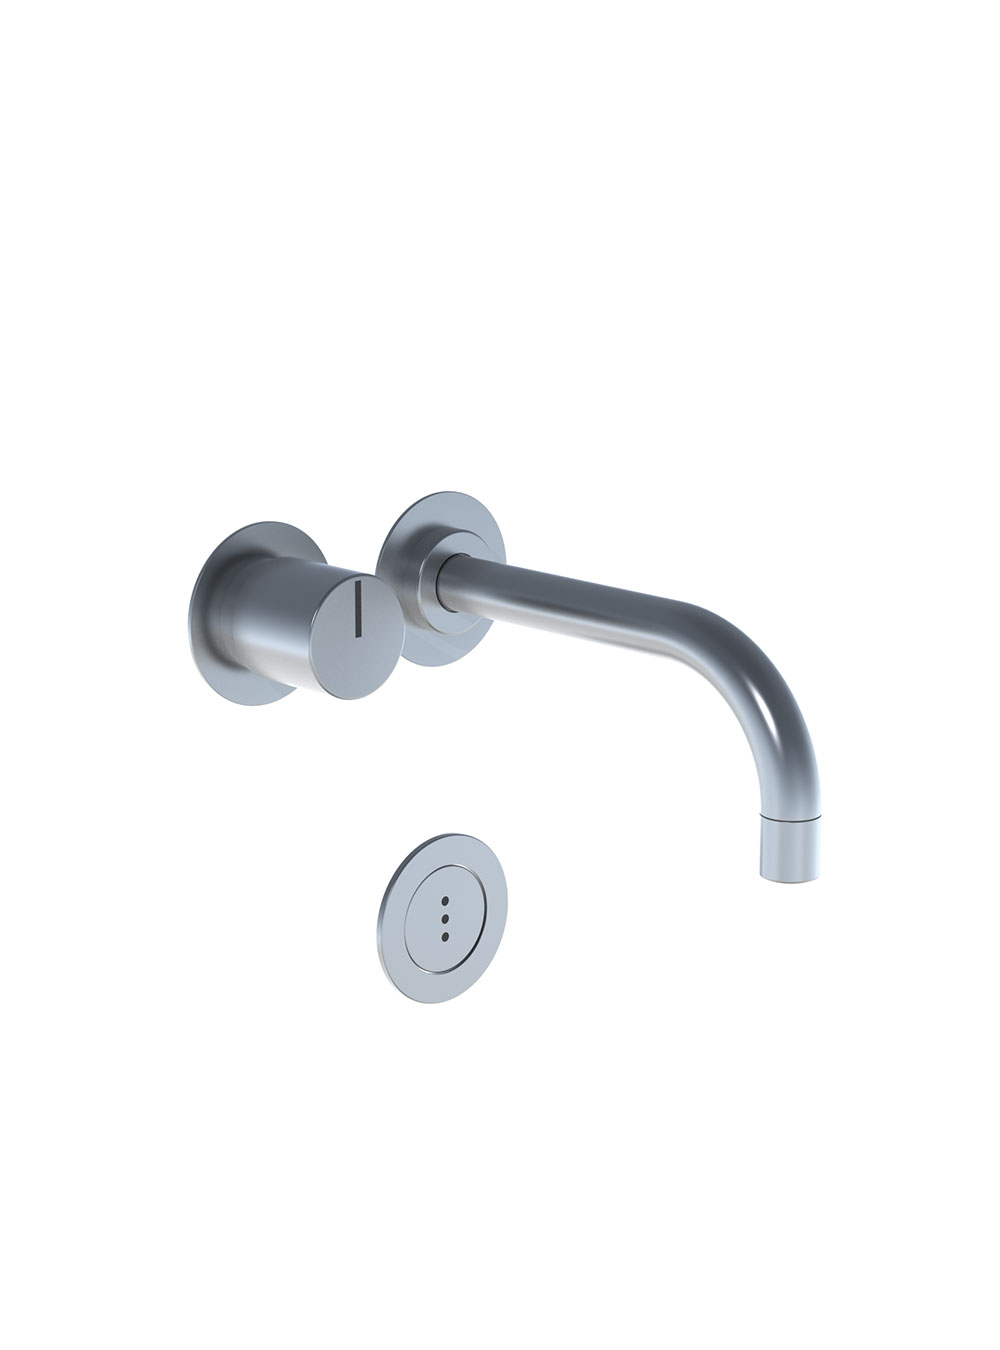 4911VS: Build-in basin mixer with on-off sensor for ‘hands free’ operation. For vertical mounting. Sensor...